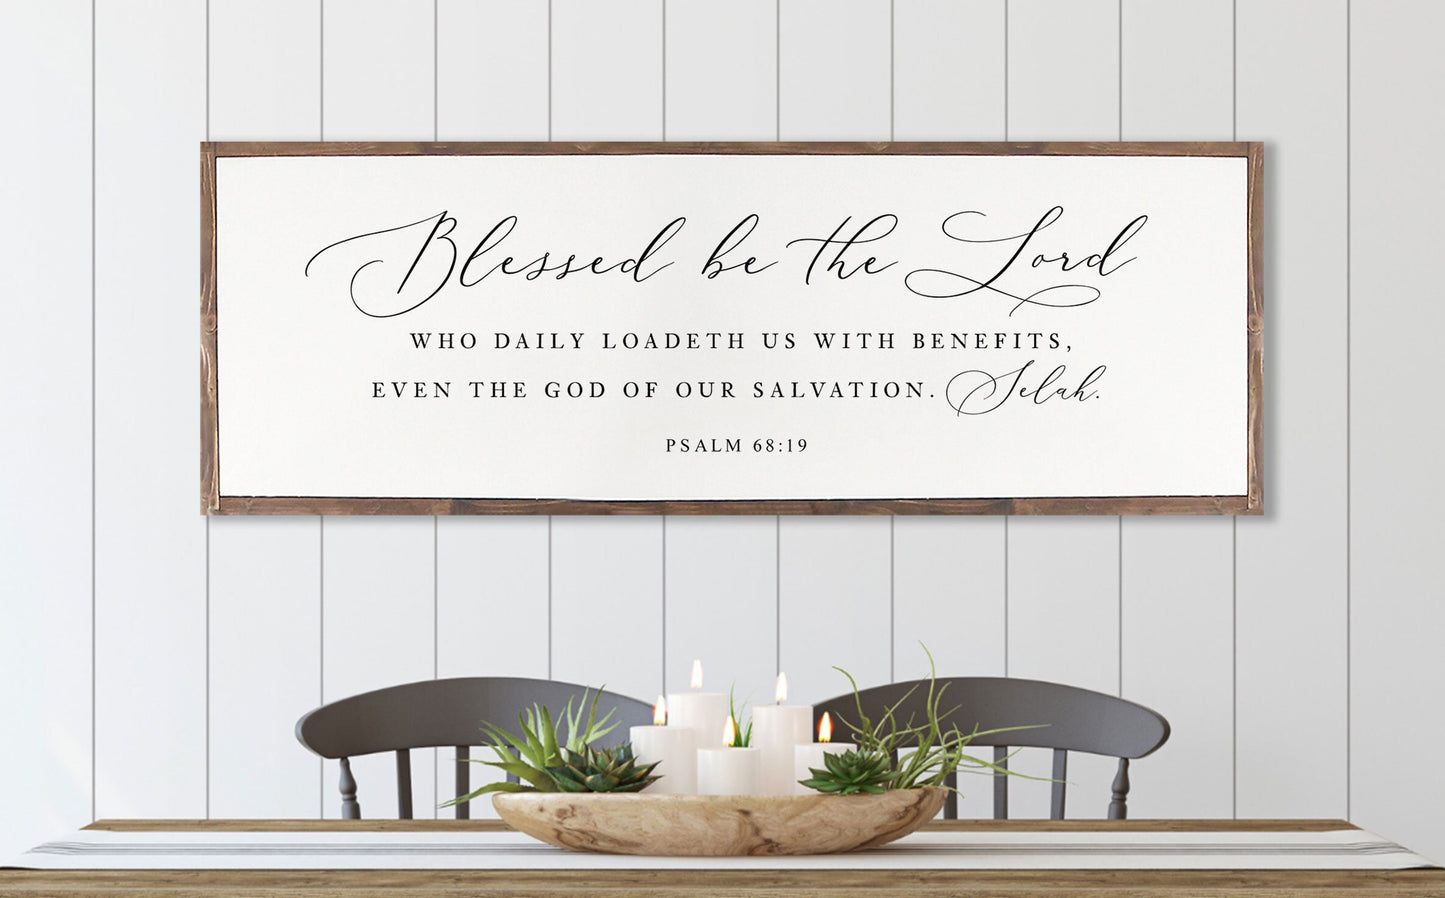 Blessed be the Lord, who daily loadeth us with benefits | Psalm 68:19 | CHRISTIAN WALL ART  | Farmhouse | Scripture Sign | framed wood sign